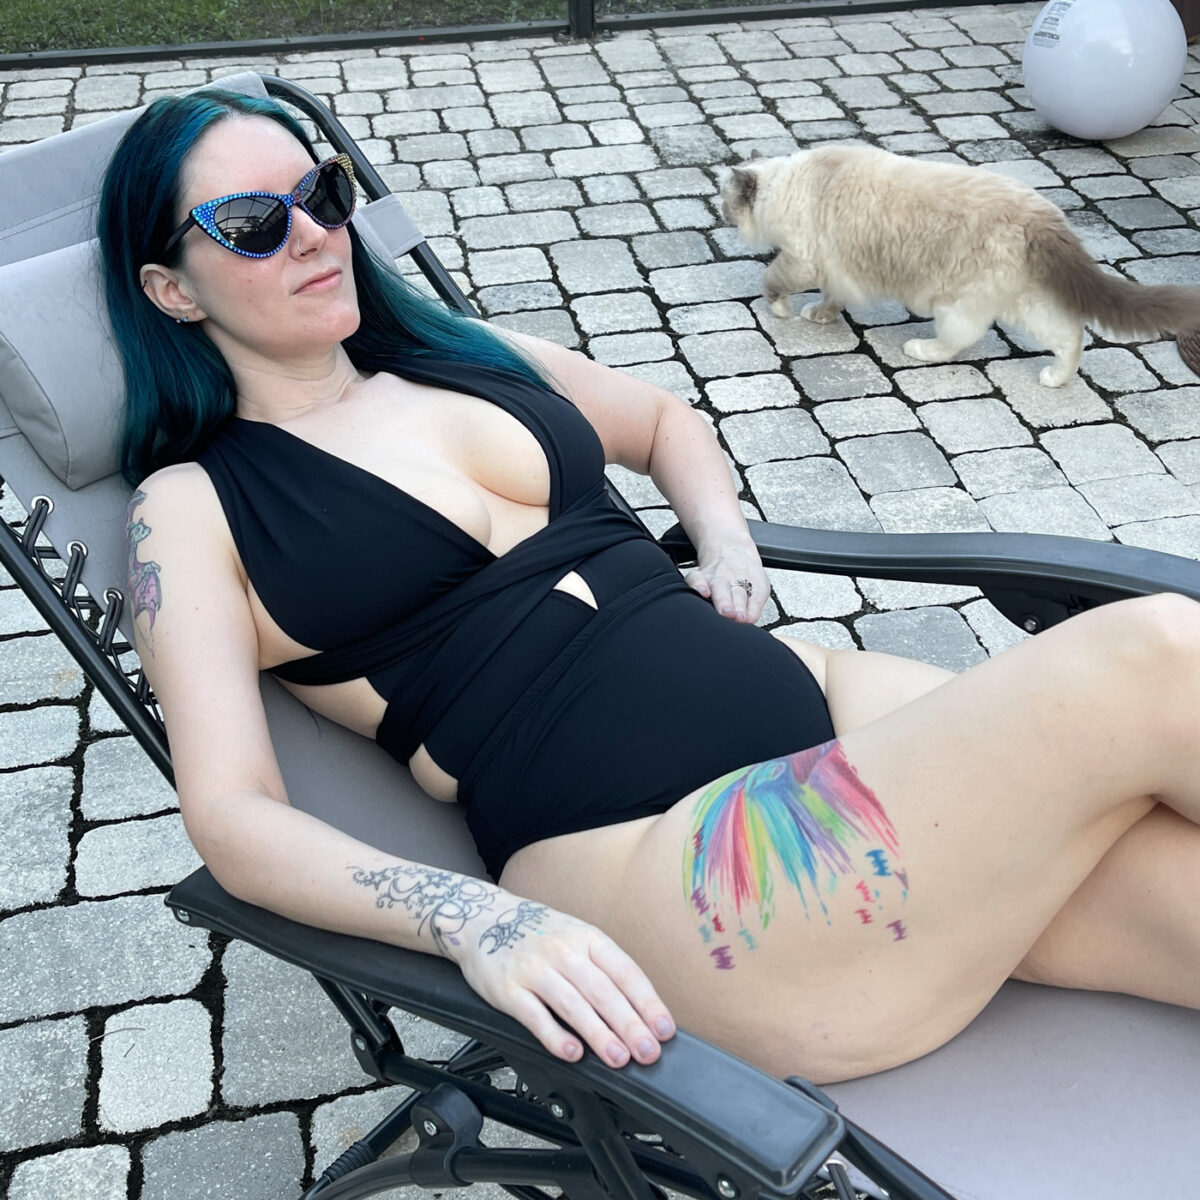 Bad witch by the pool with a cute ragdoll cat in the background